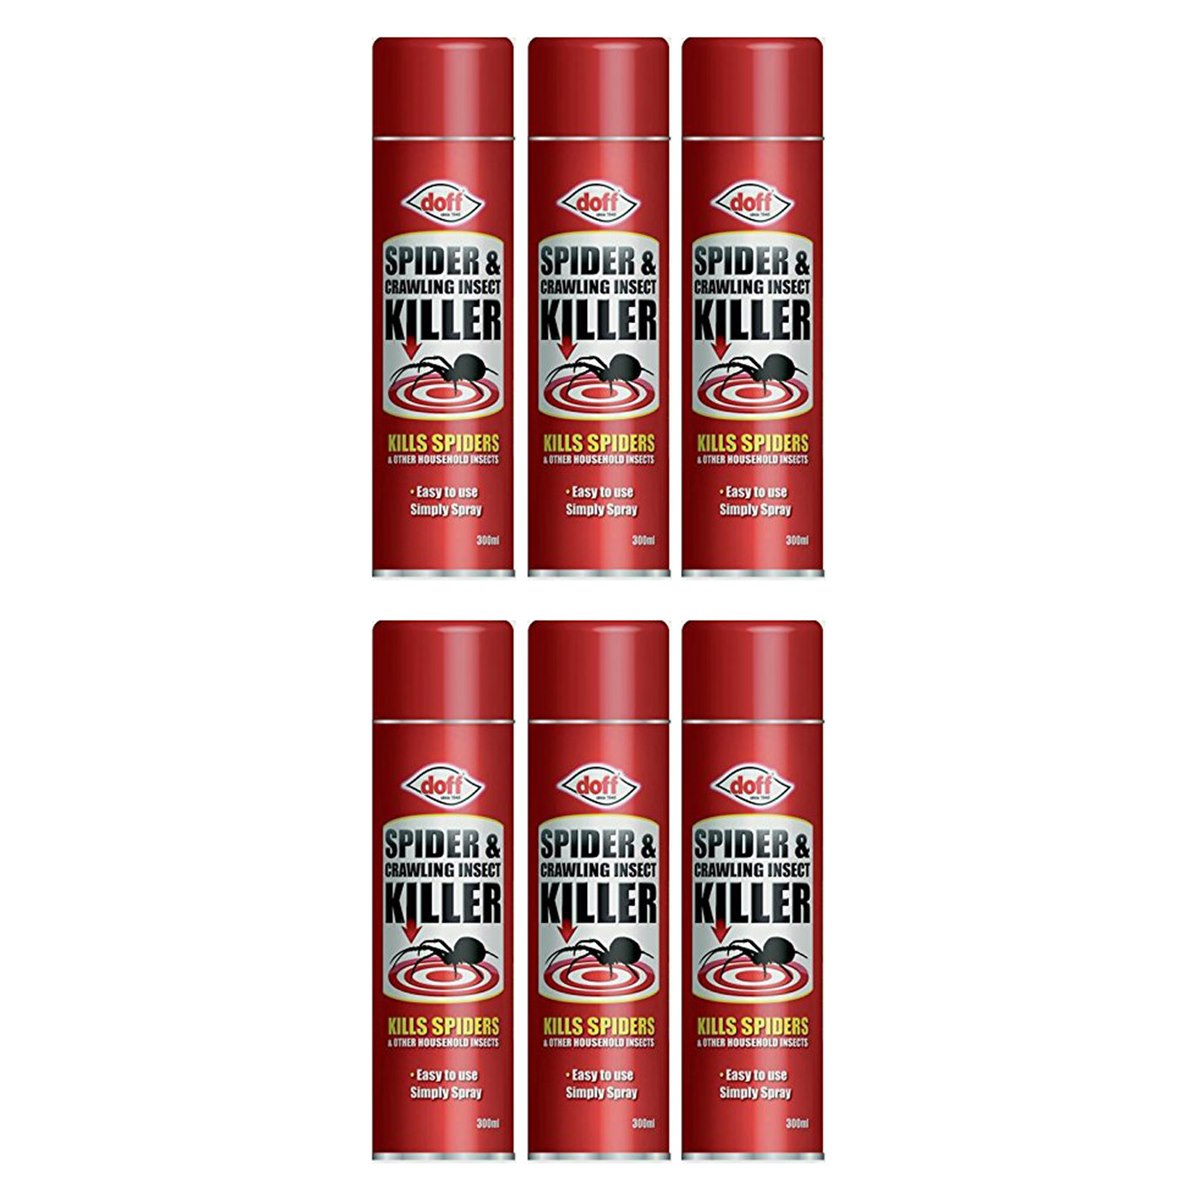 Case of 6 x Doff Spider and Crawling Insect Killer Aerosol 300ml